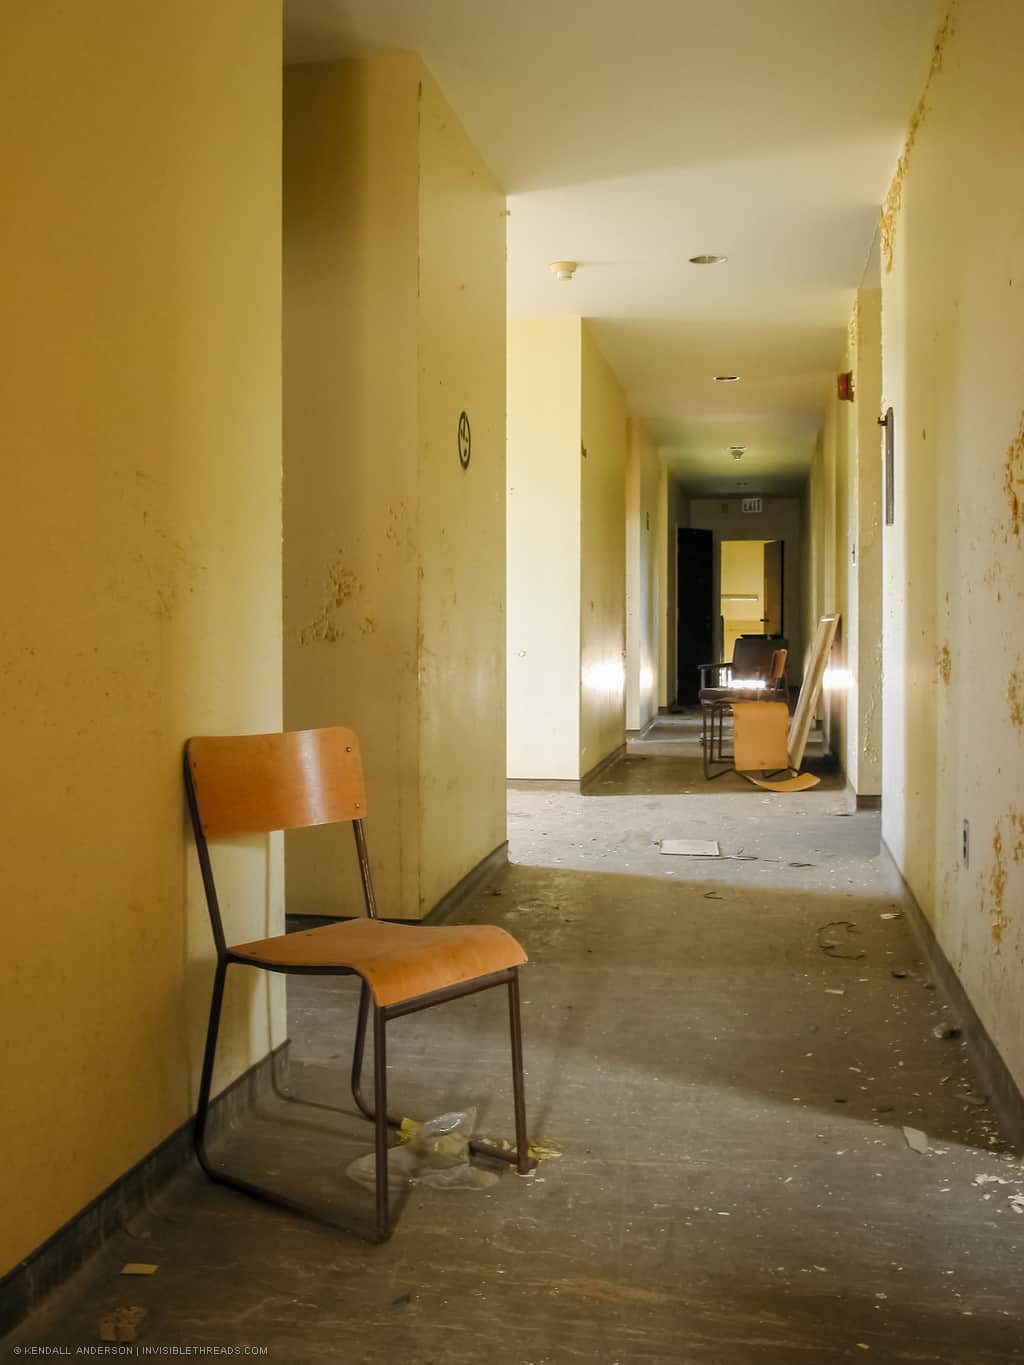 A chair is on the floor in a long yellow hallway, with additional chairs piled in the distance. The floor has debris on it and the paint on the walls is just beginning to show signs of water damage and peeling.